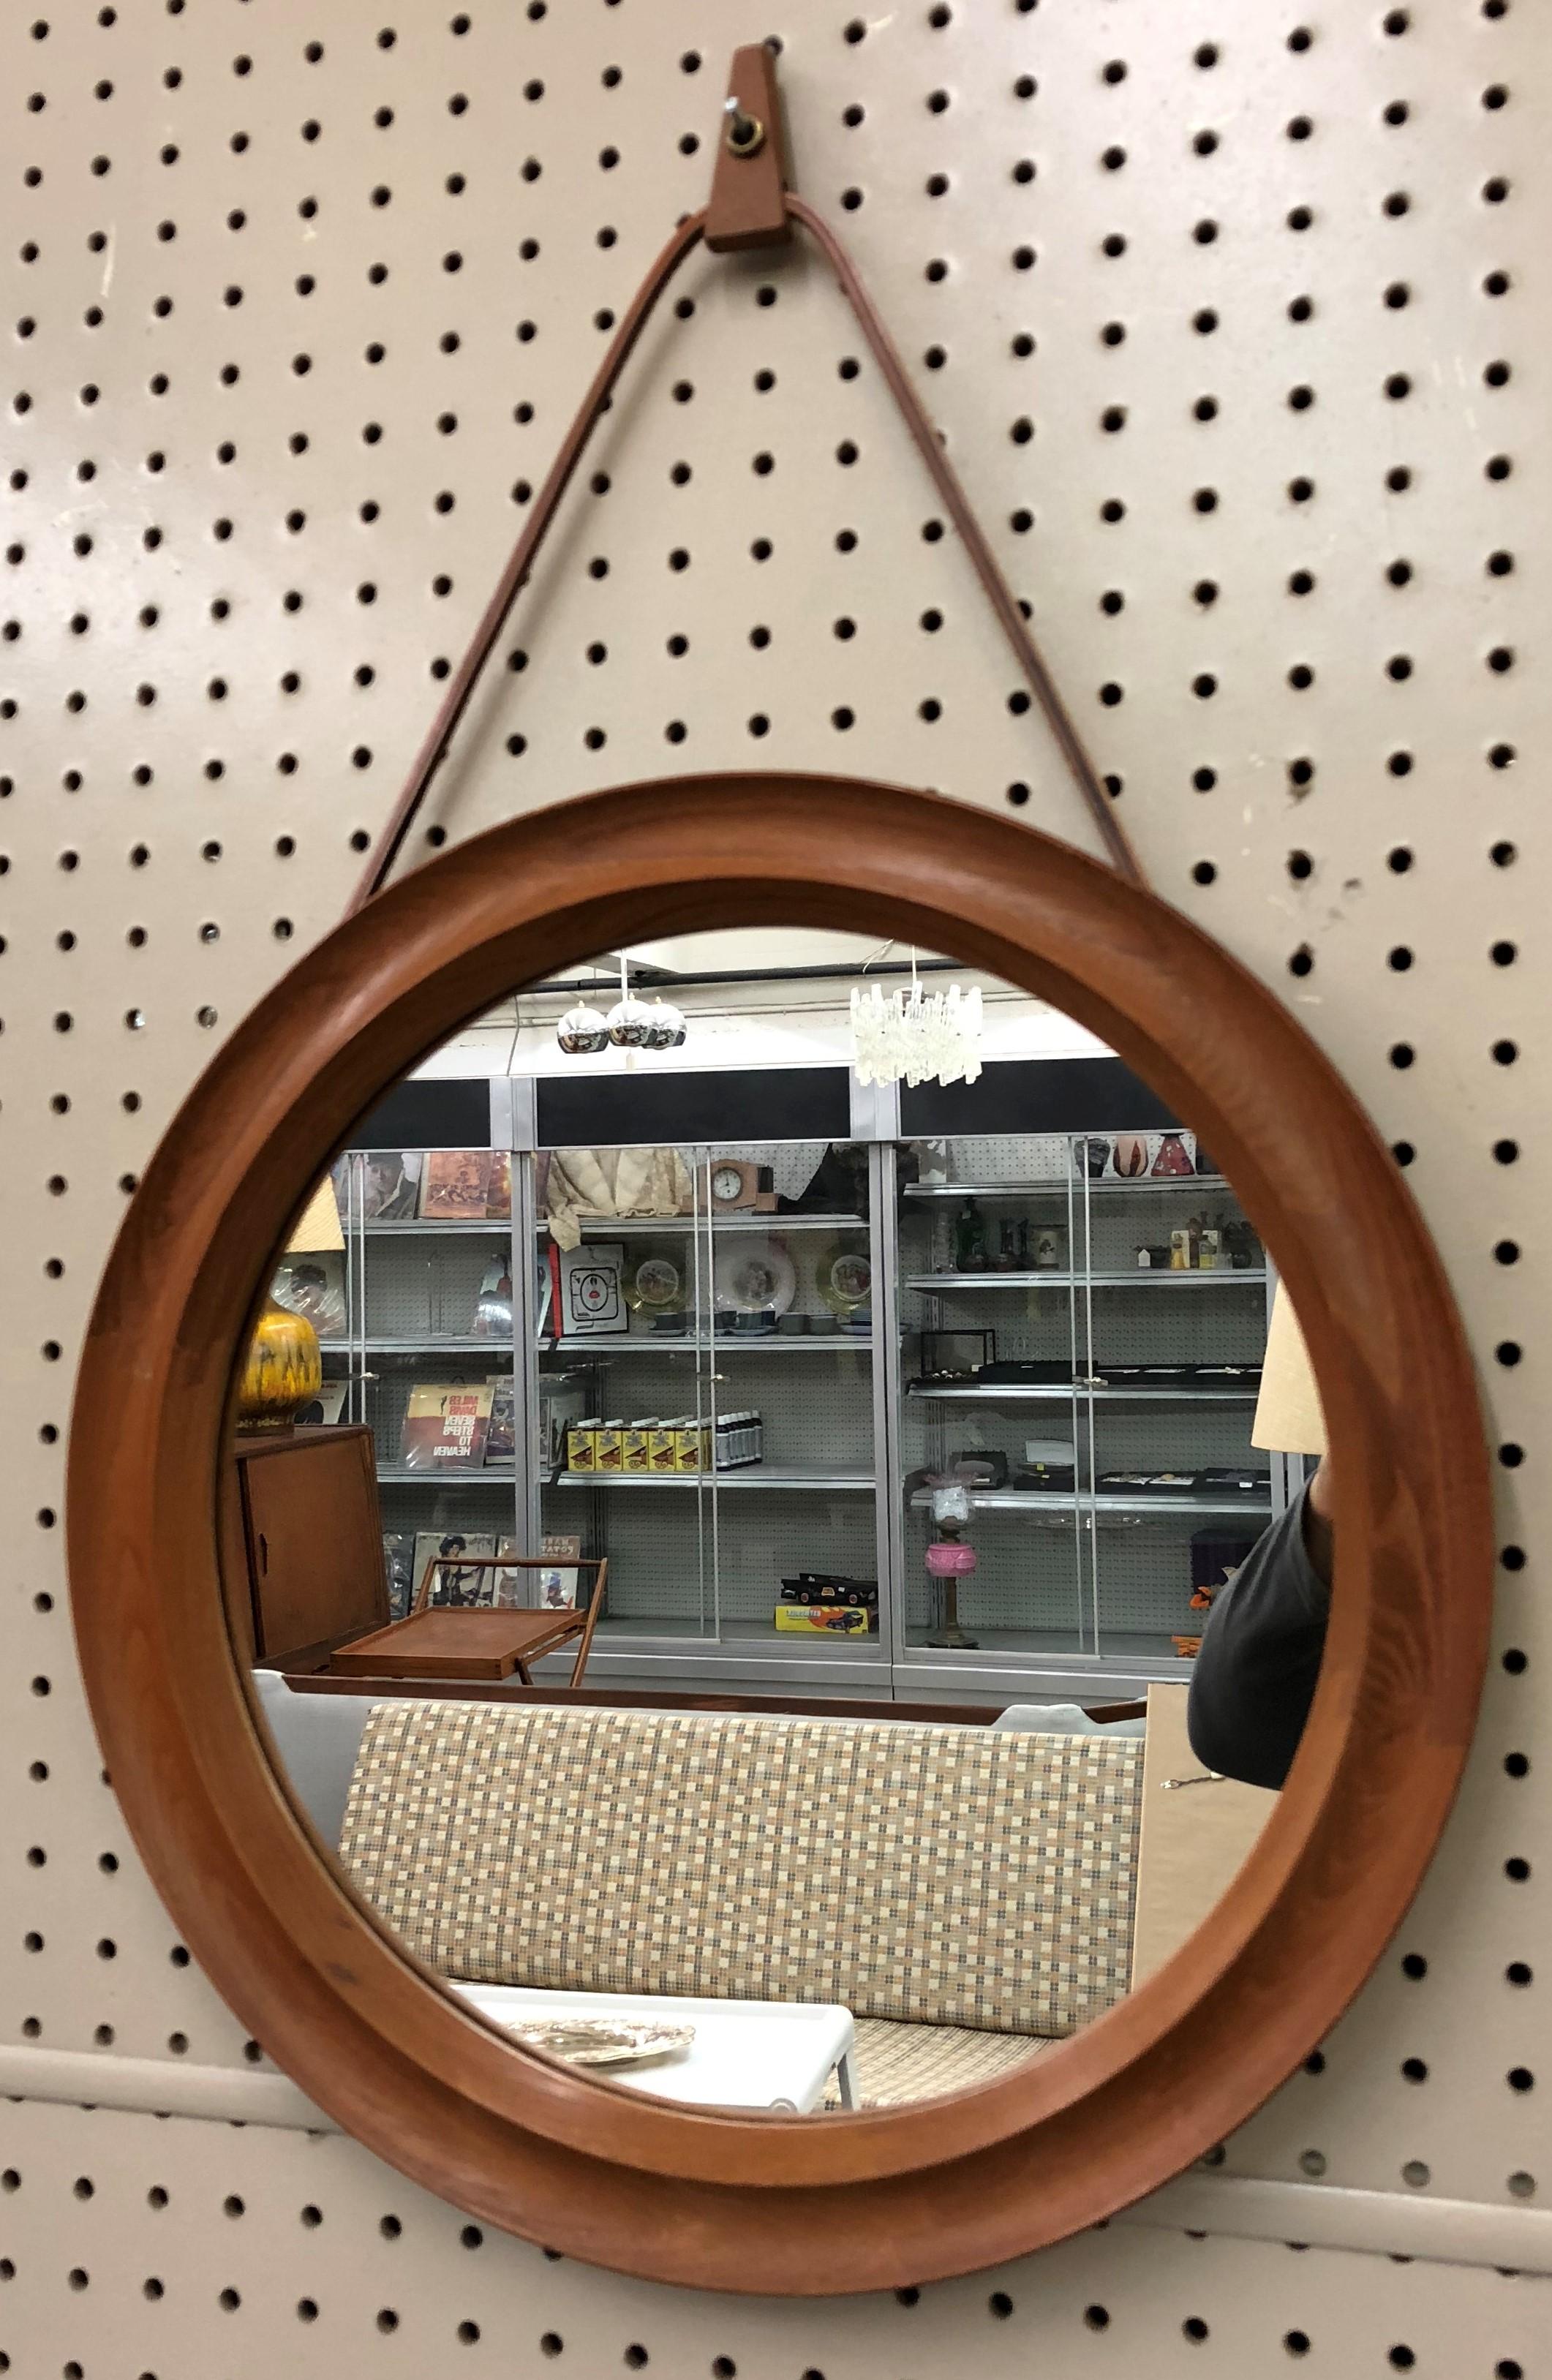 Teak Danish oval mirror made by Pedersen and Hansen (Viby J. made in Denmark)  Hangs from a brown leather strap to create a minimalist appearance and a teak wood nail holder, measuring 15.75 inches round. 

Mid-Century Modern / Scandinavian Modern